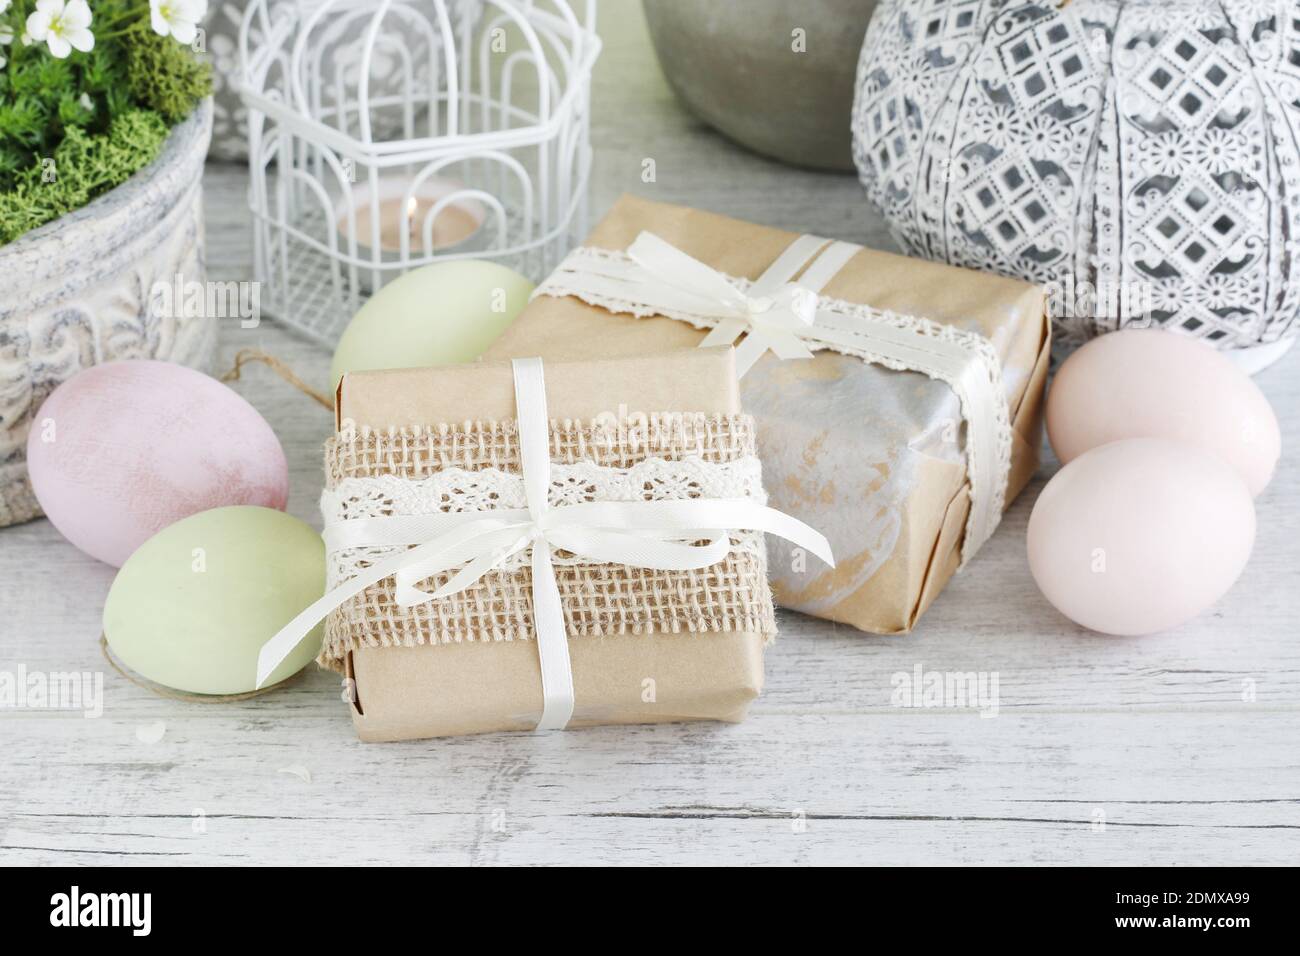 Easrter gifts decorated with lace and ribbon, colorful eggs and saxifraga arendsii (Schneeteppich) flowers. Stock Photo